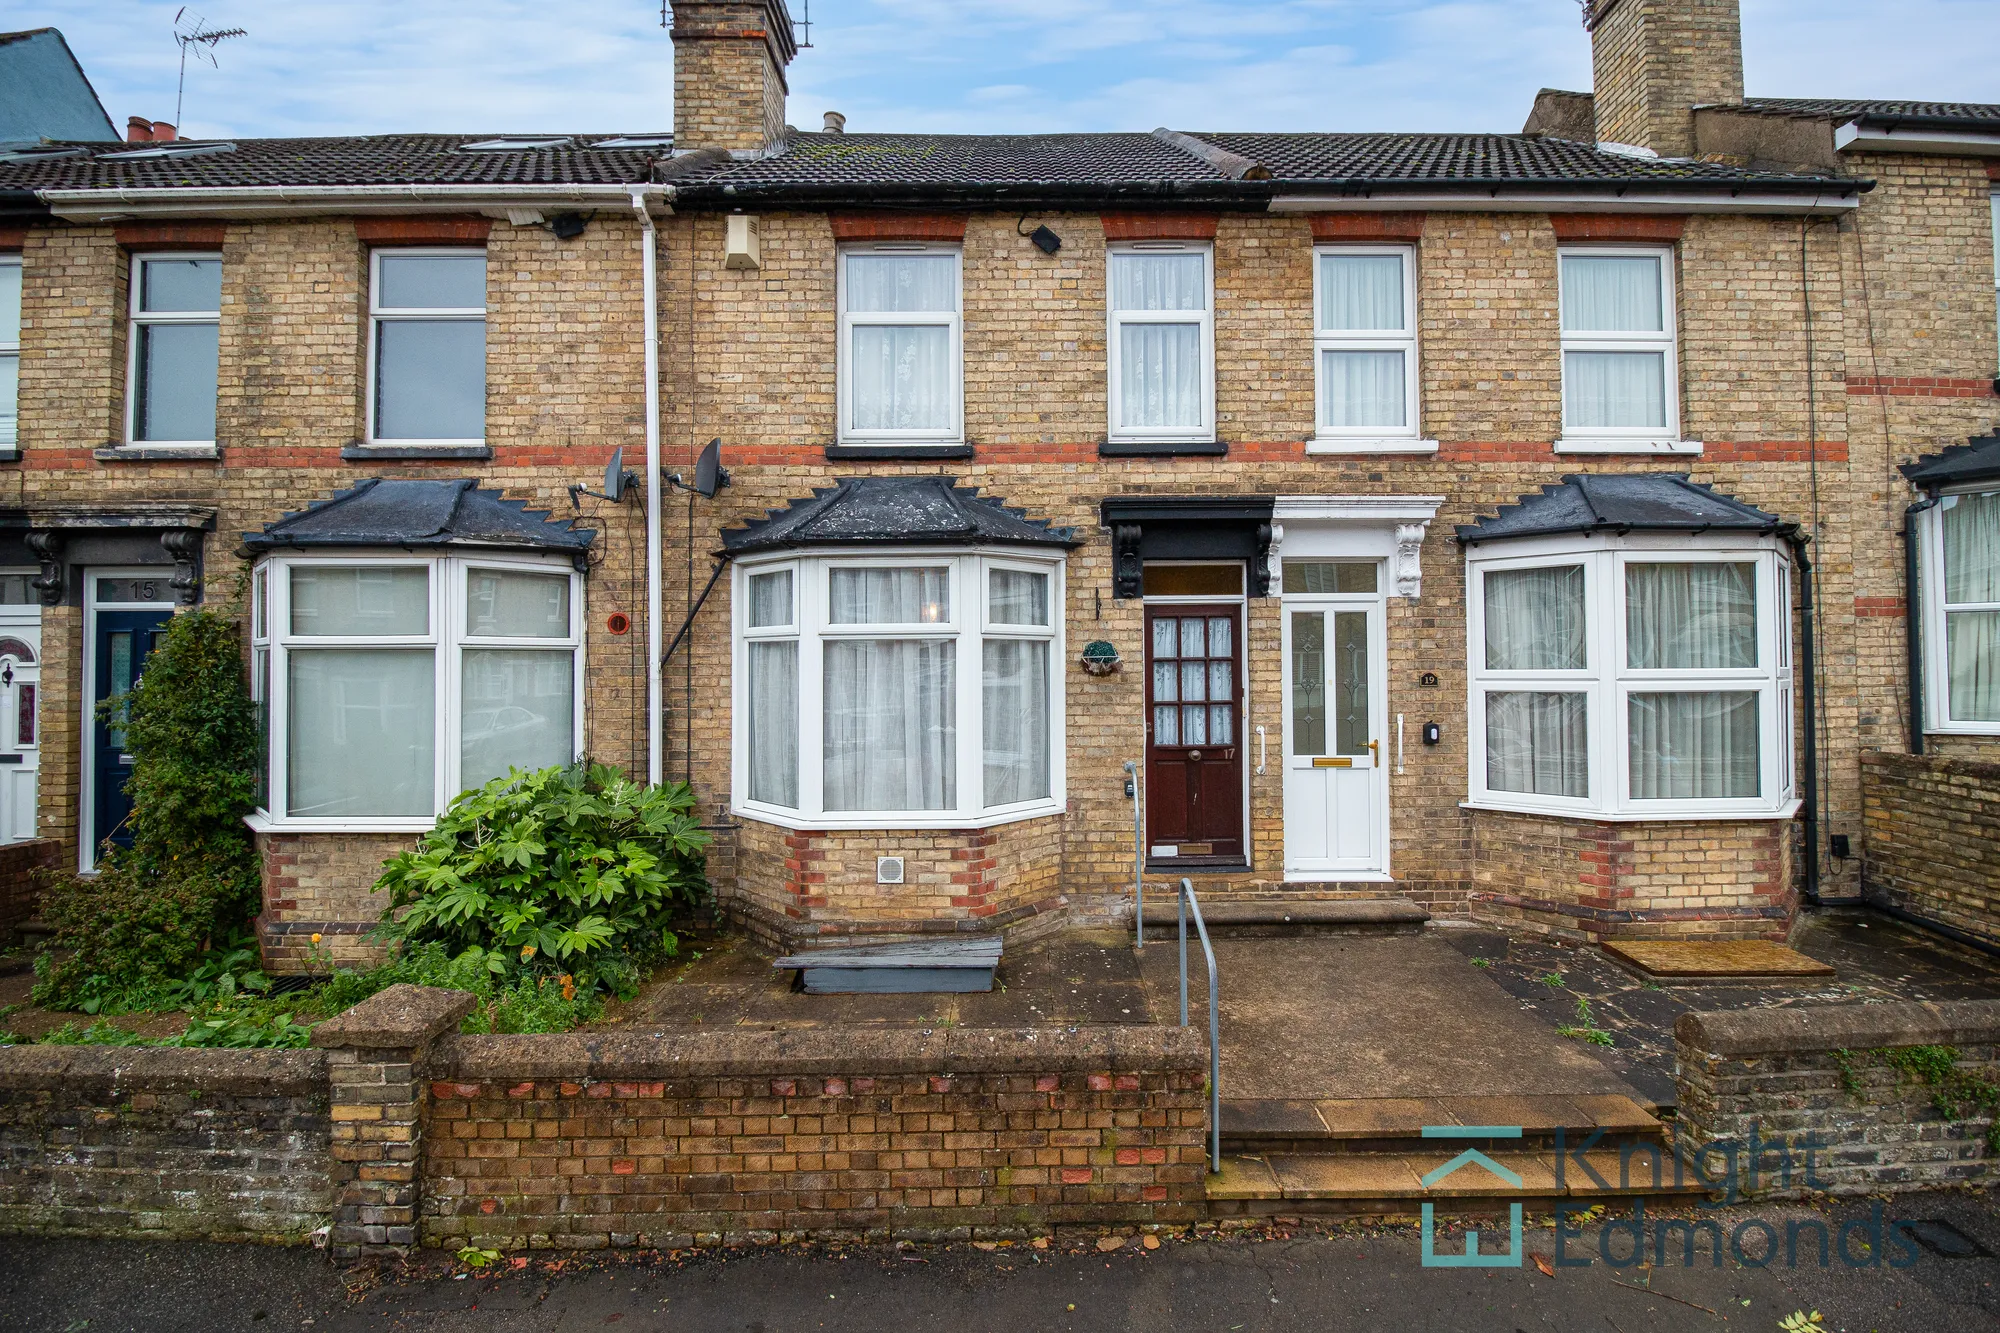 3 bed mid-terraced house for sale in Victoria Street, Maidstone - Property Image 1